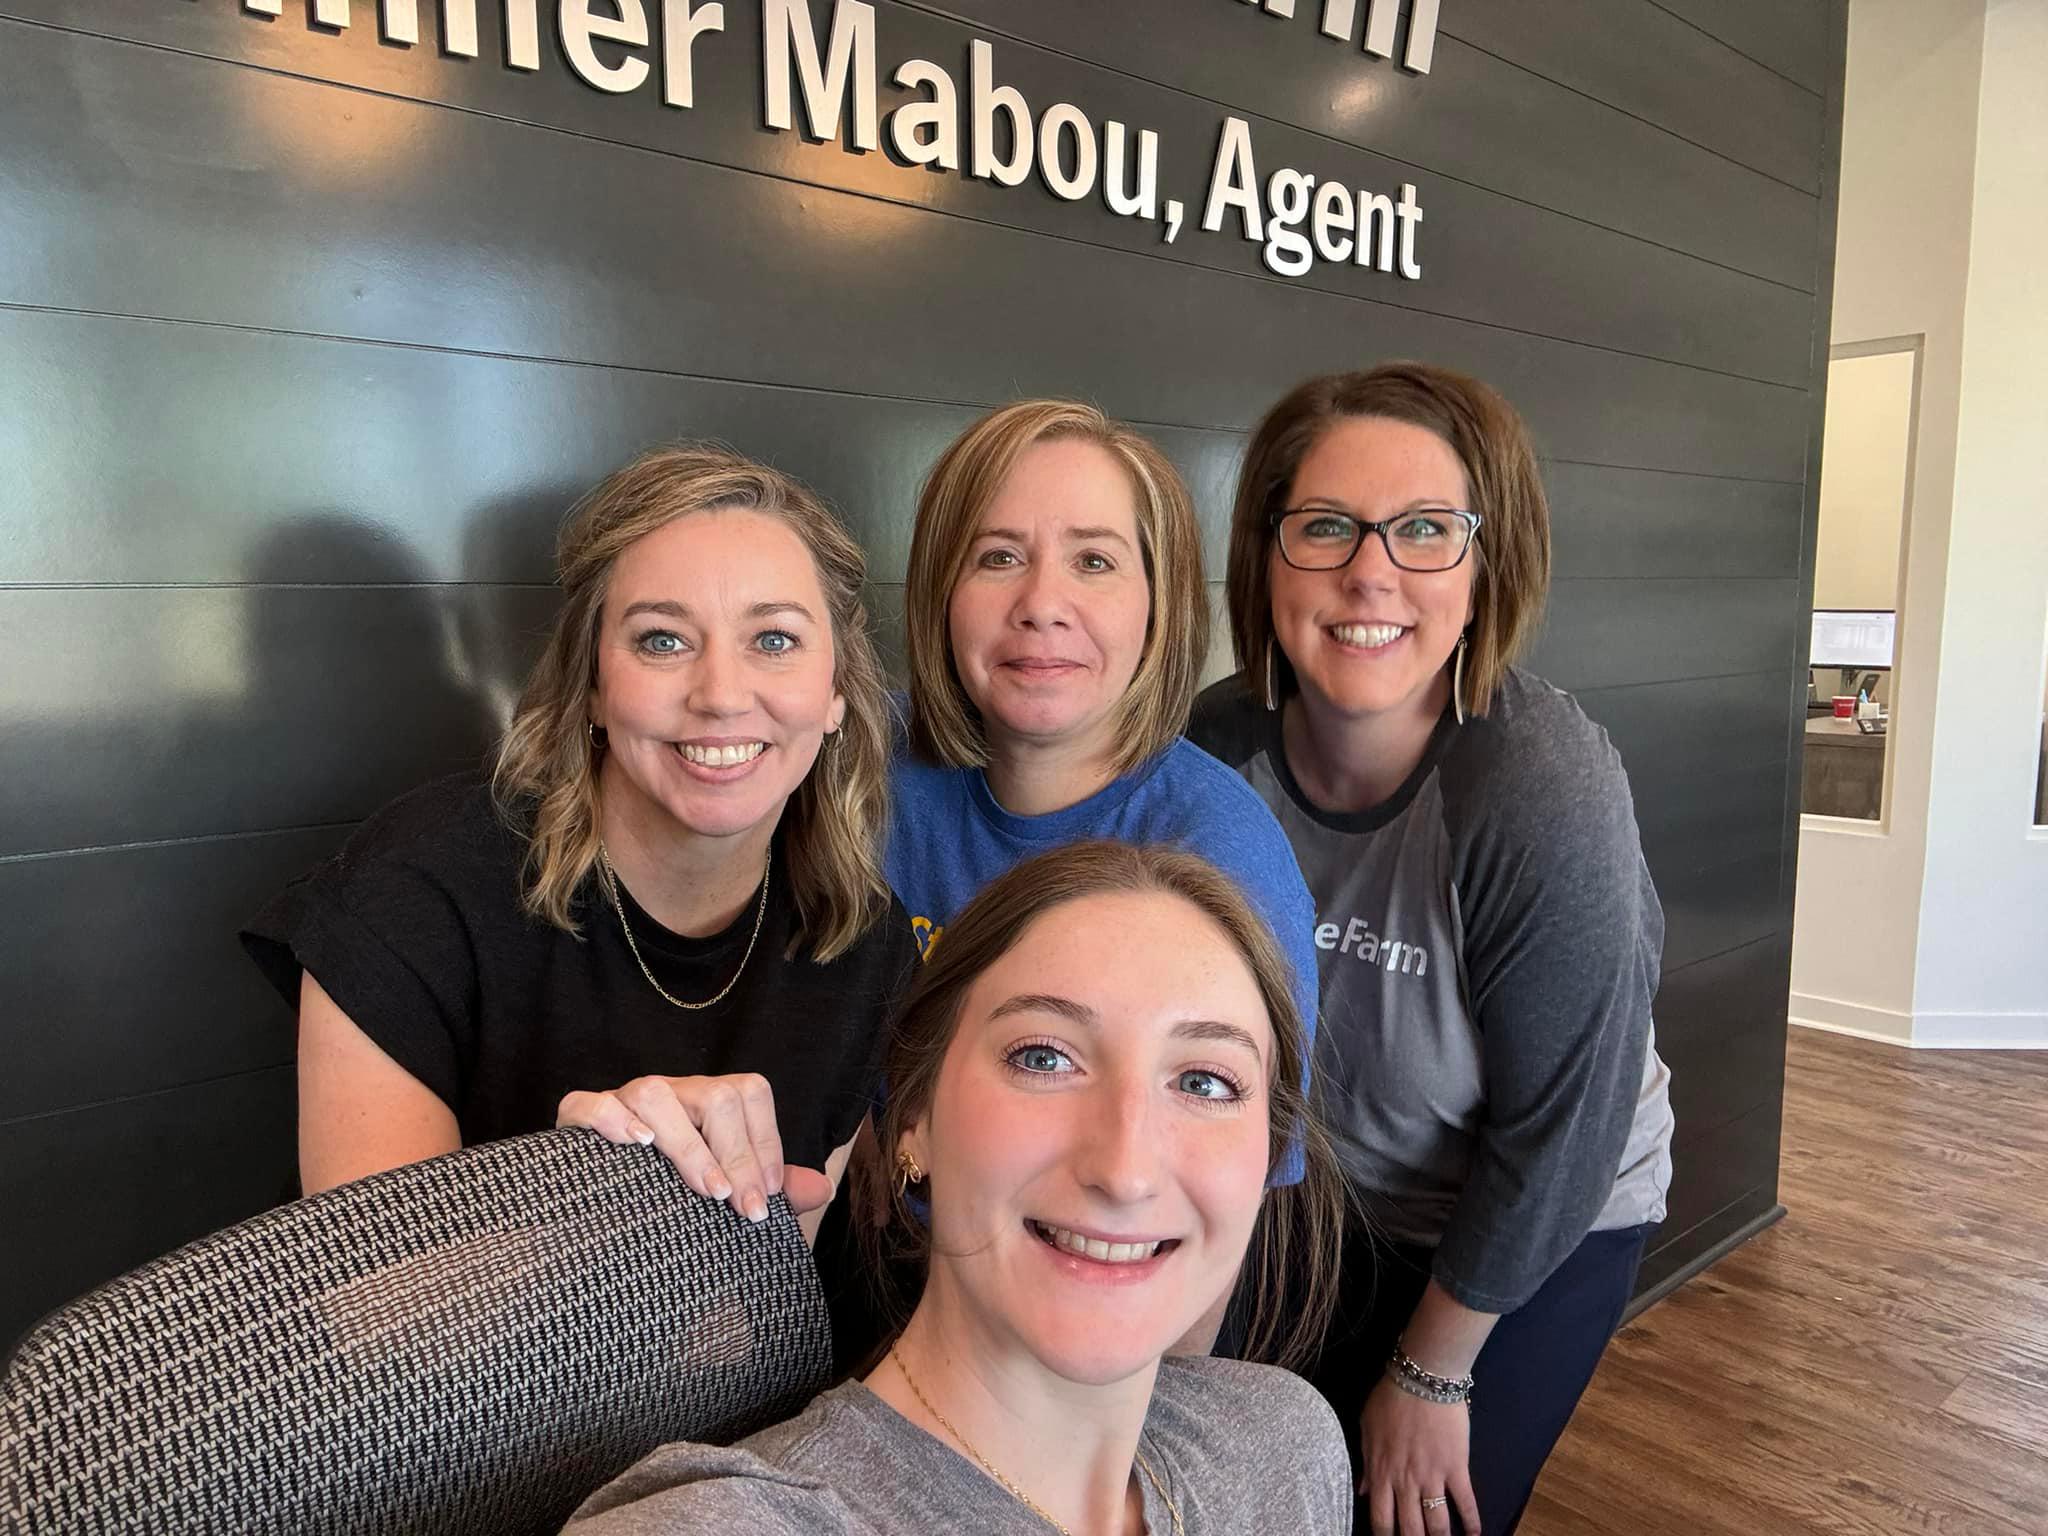 It’s a beautiful day at Jennifer Mabou State Farm! Call in or stop in to see how these ladies can he Jennifer Mabou - State Farm Insurance Agent Sulphur (337)527-0027